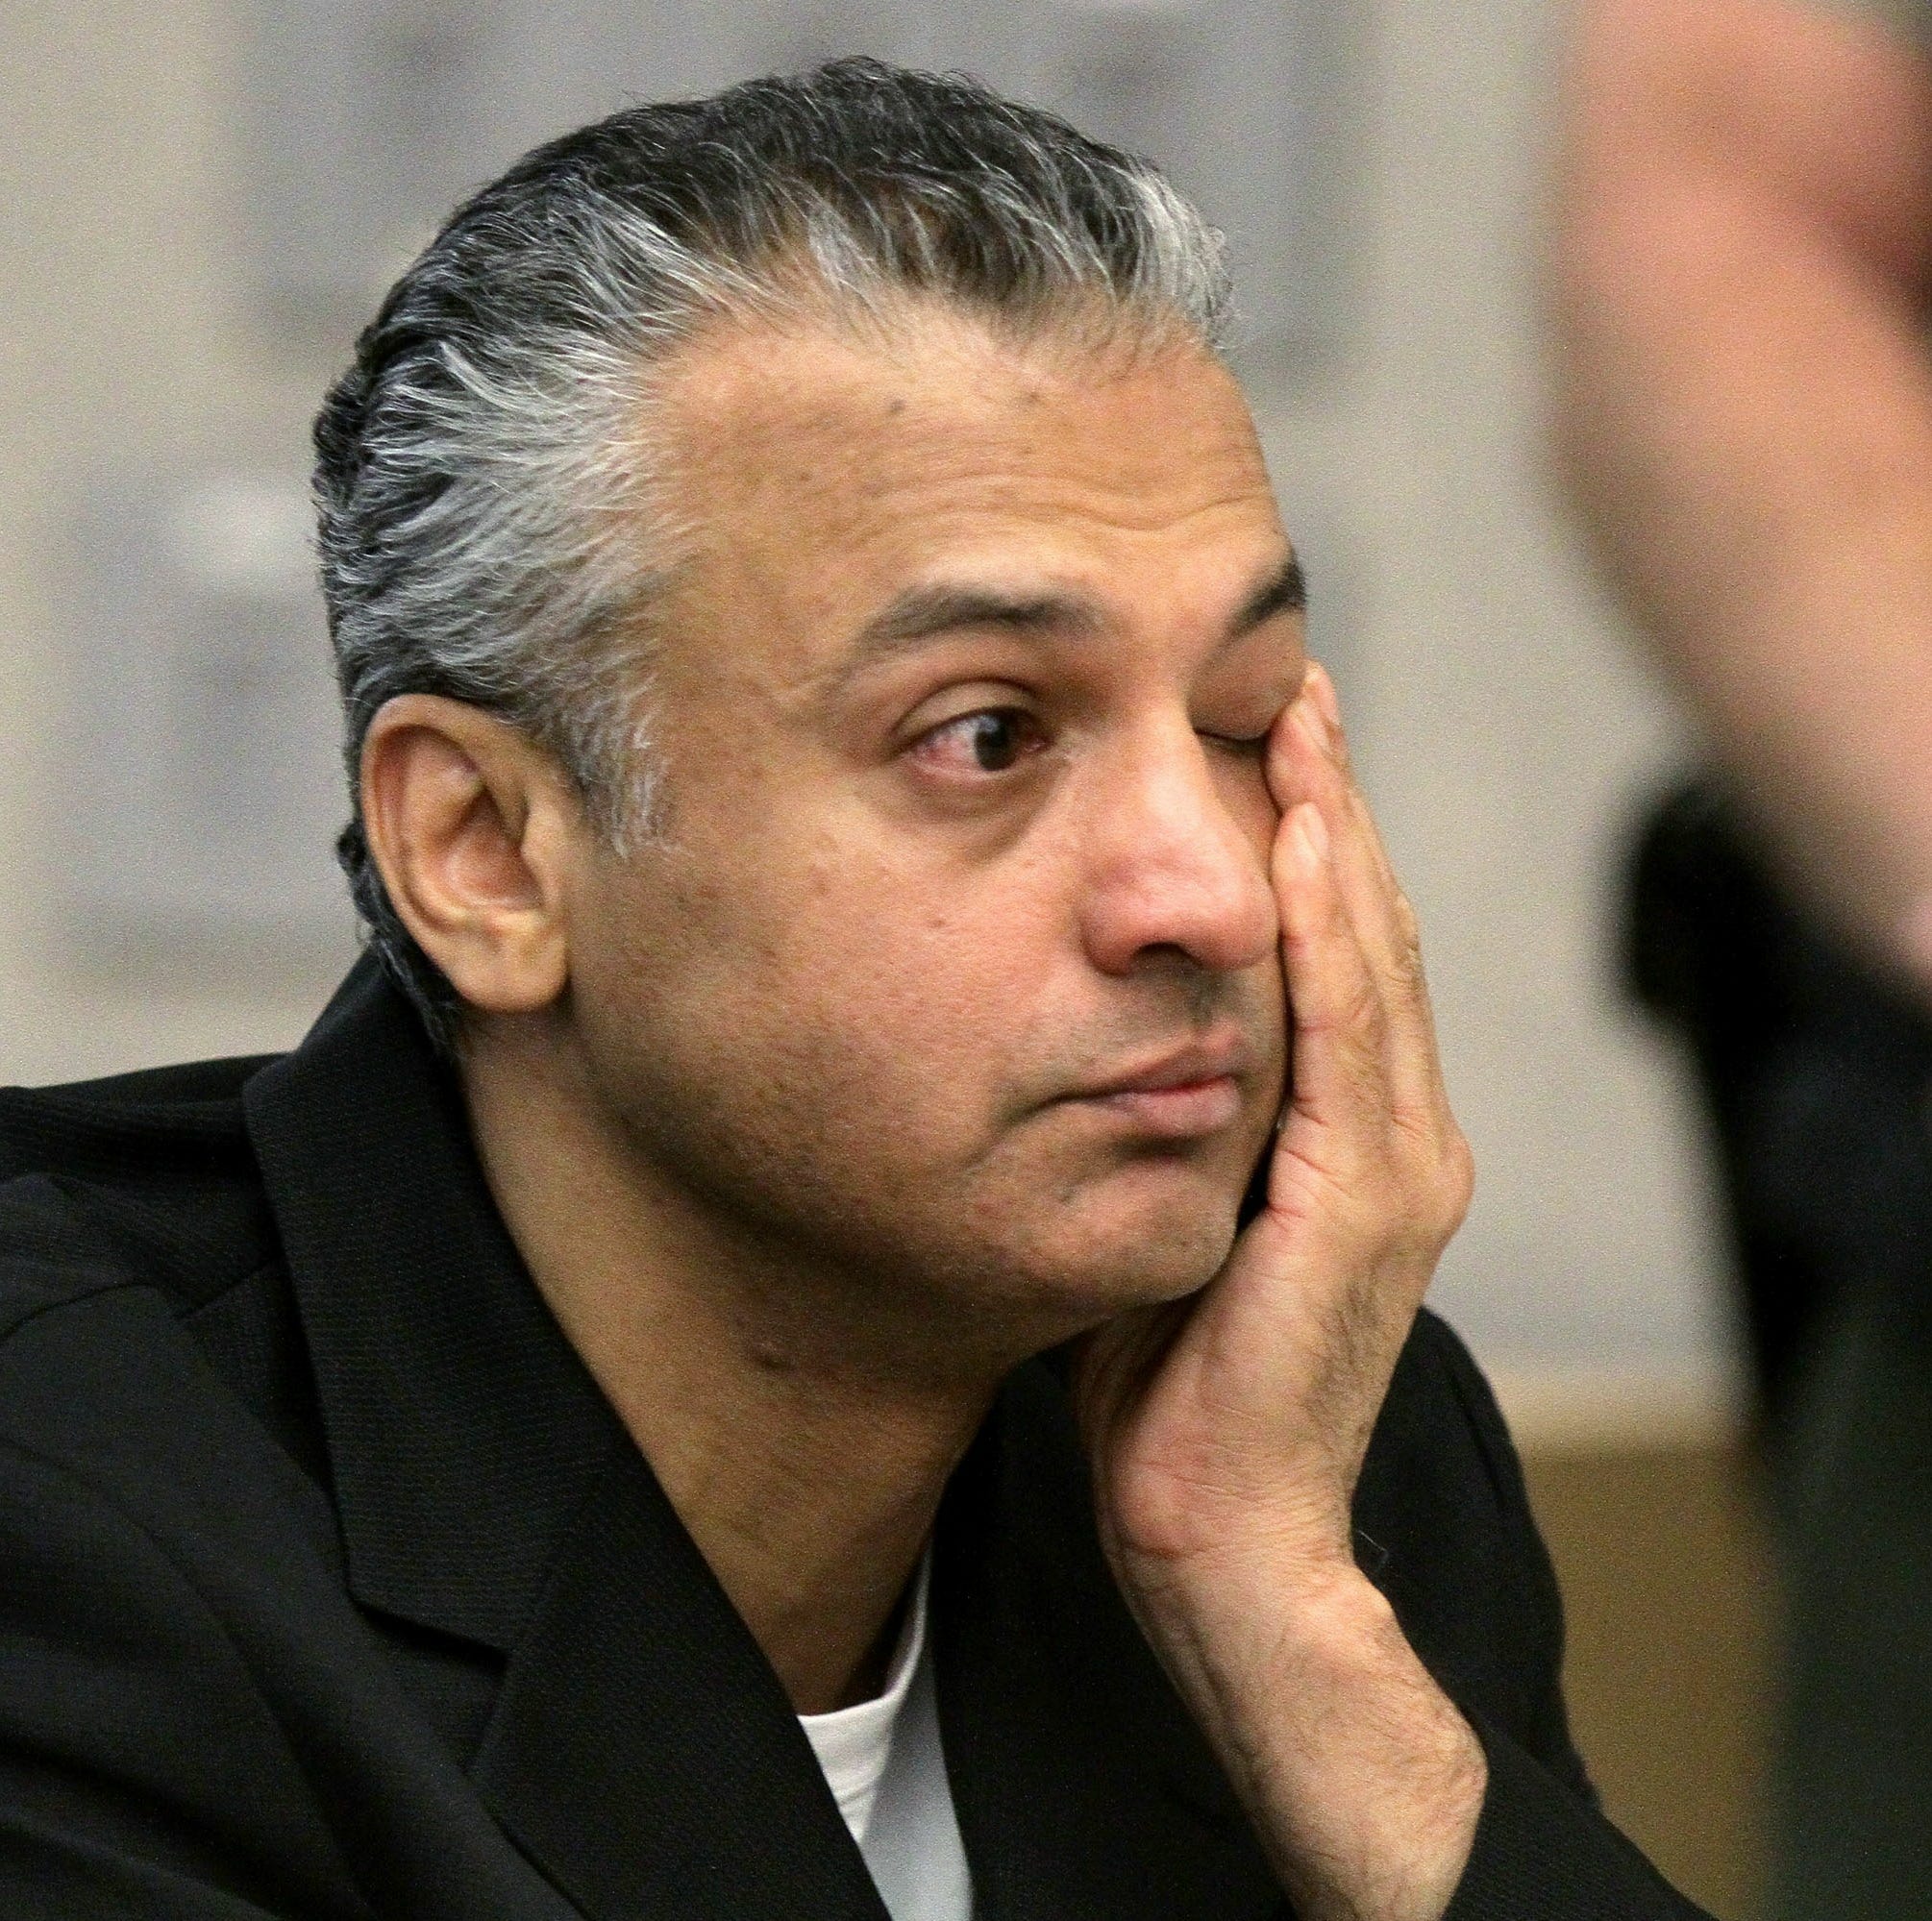 Actor Shelley Malil was sentenced to 12 years to life in prison for the stabbing of his girlfriend Kendra Beebe on December 16, 2010 in Vista, California.